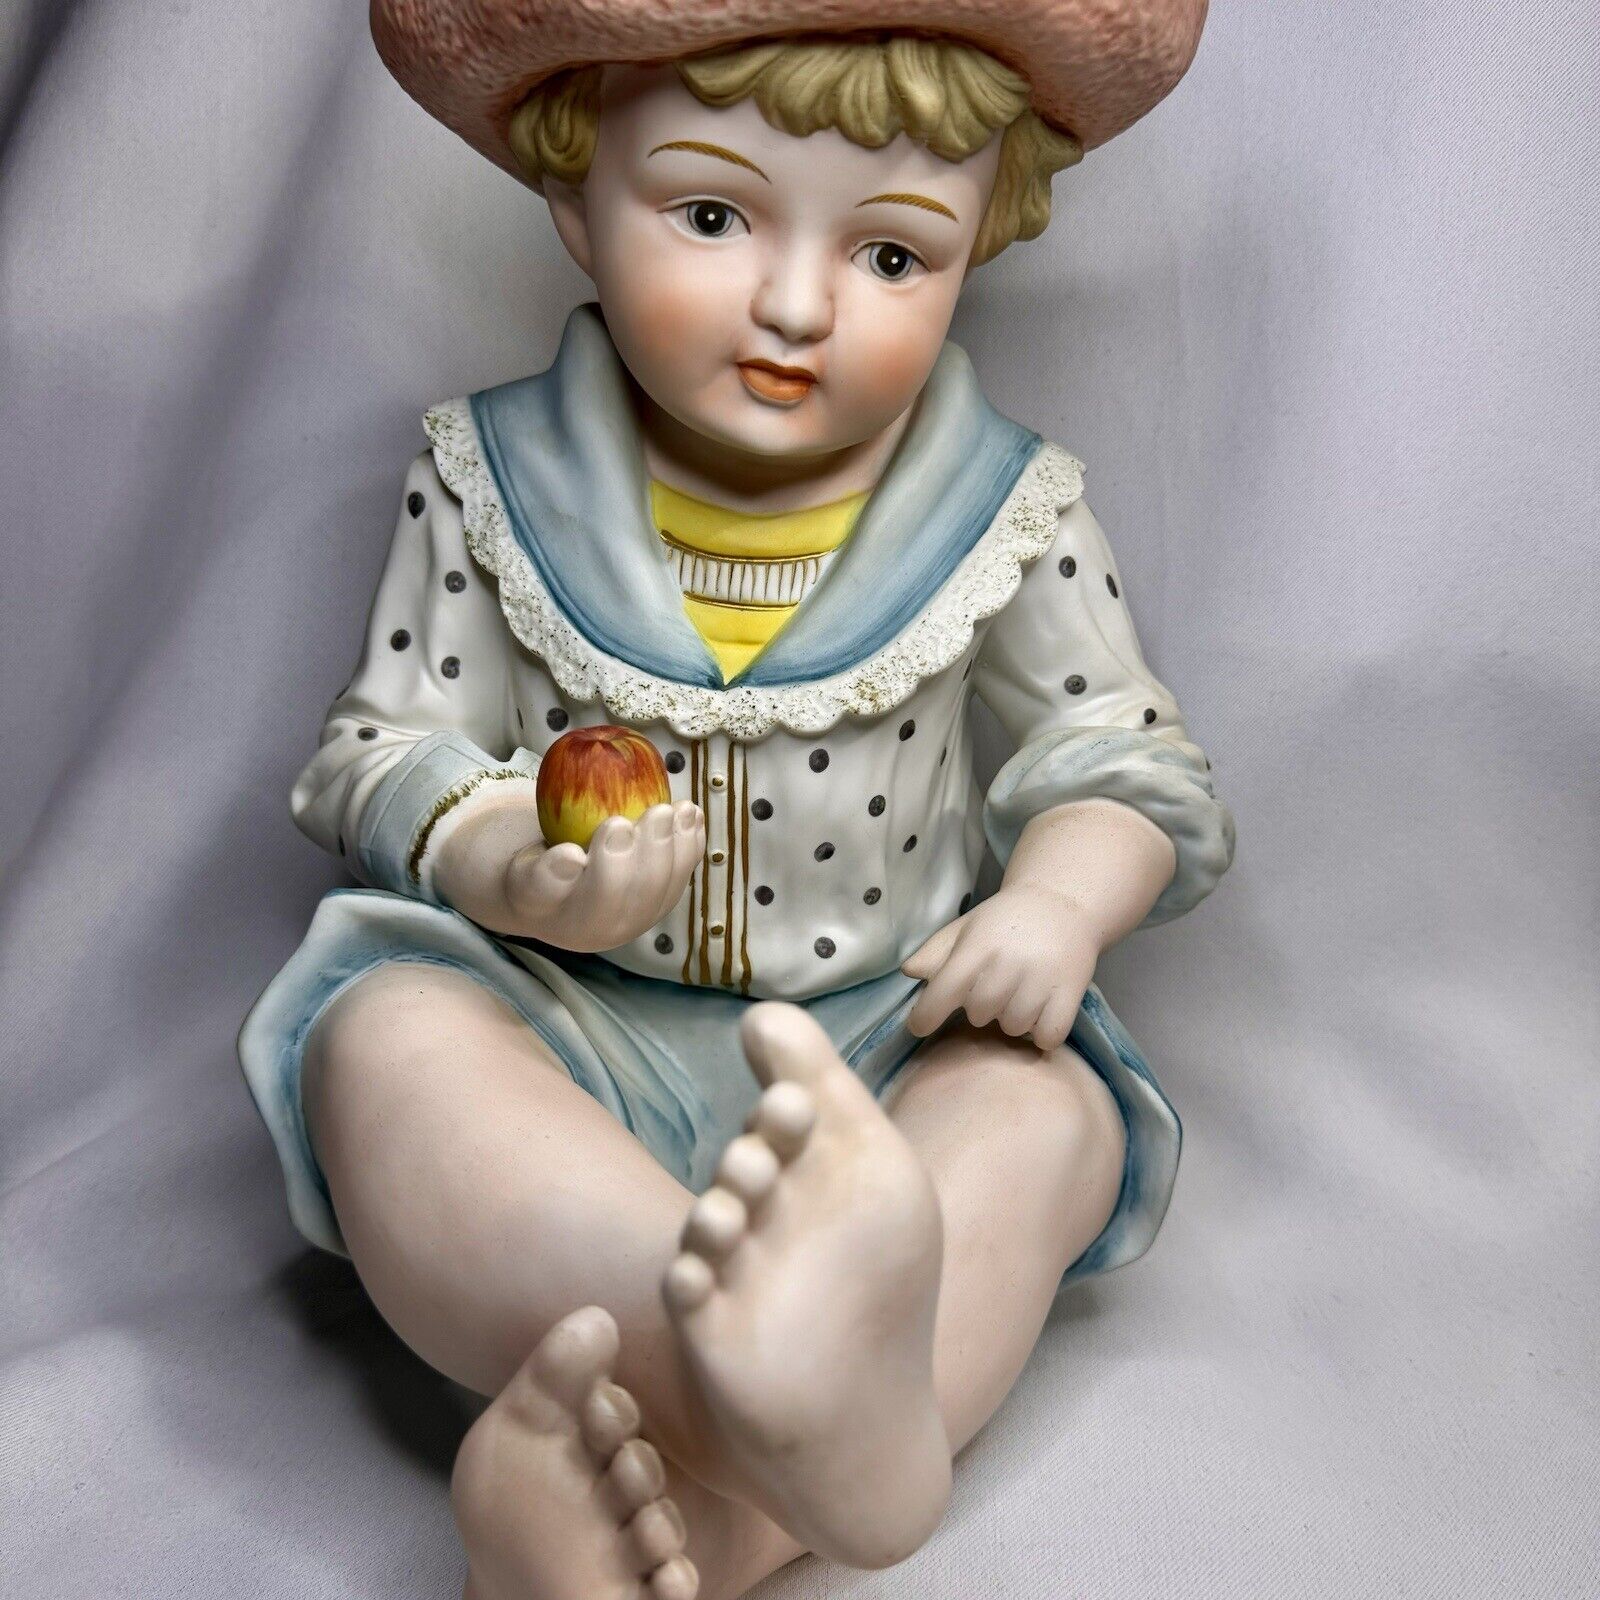 Vintage 12in Piano Baby Figurine Hand Painted Andrea Sadek Bisque 6161